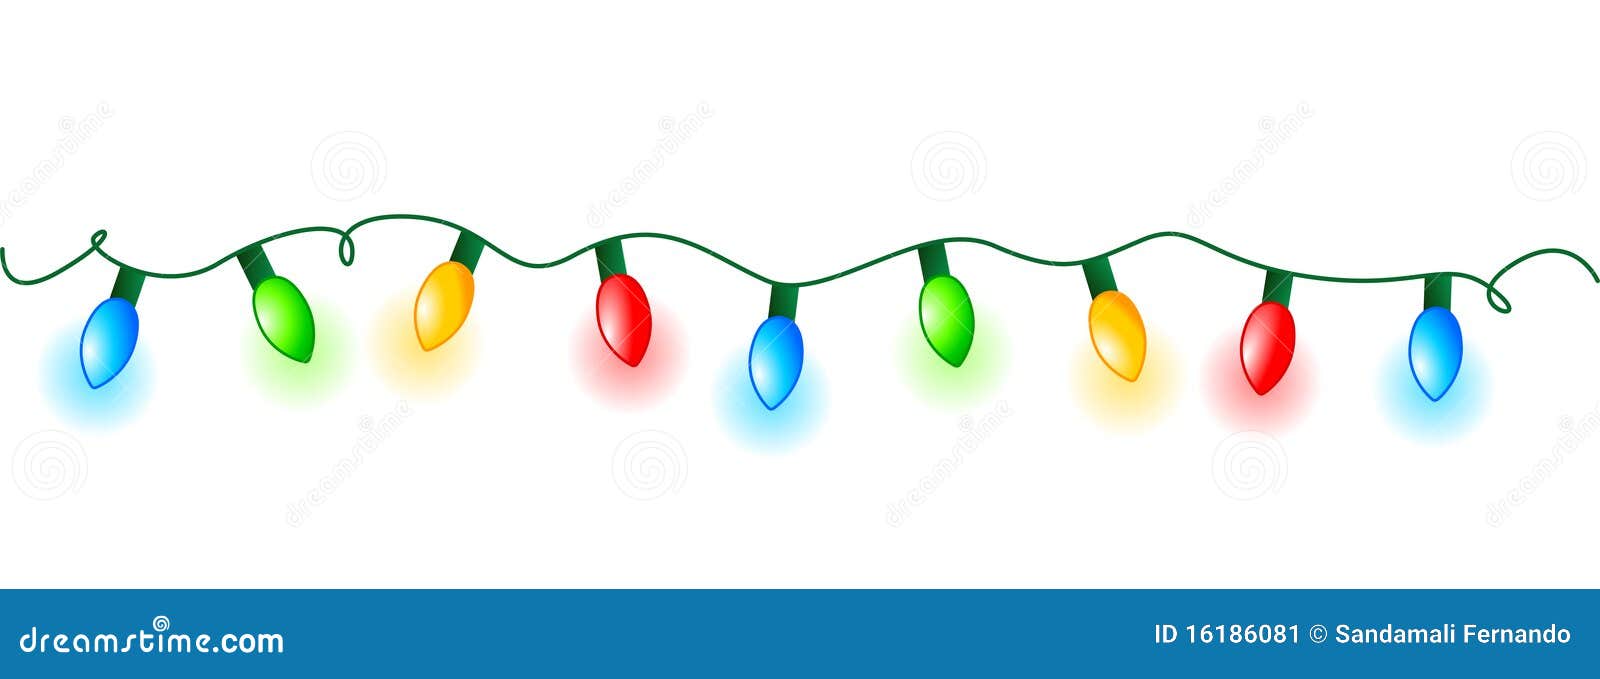 christmas dividers clipart - photo #13